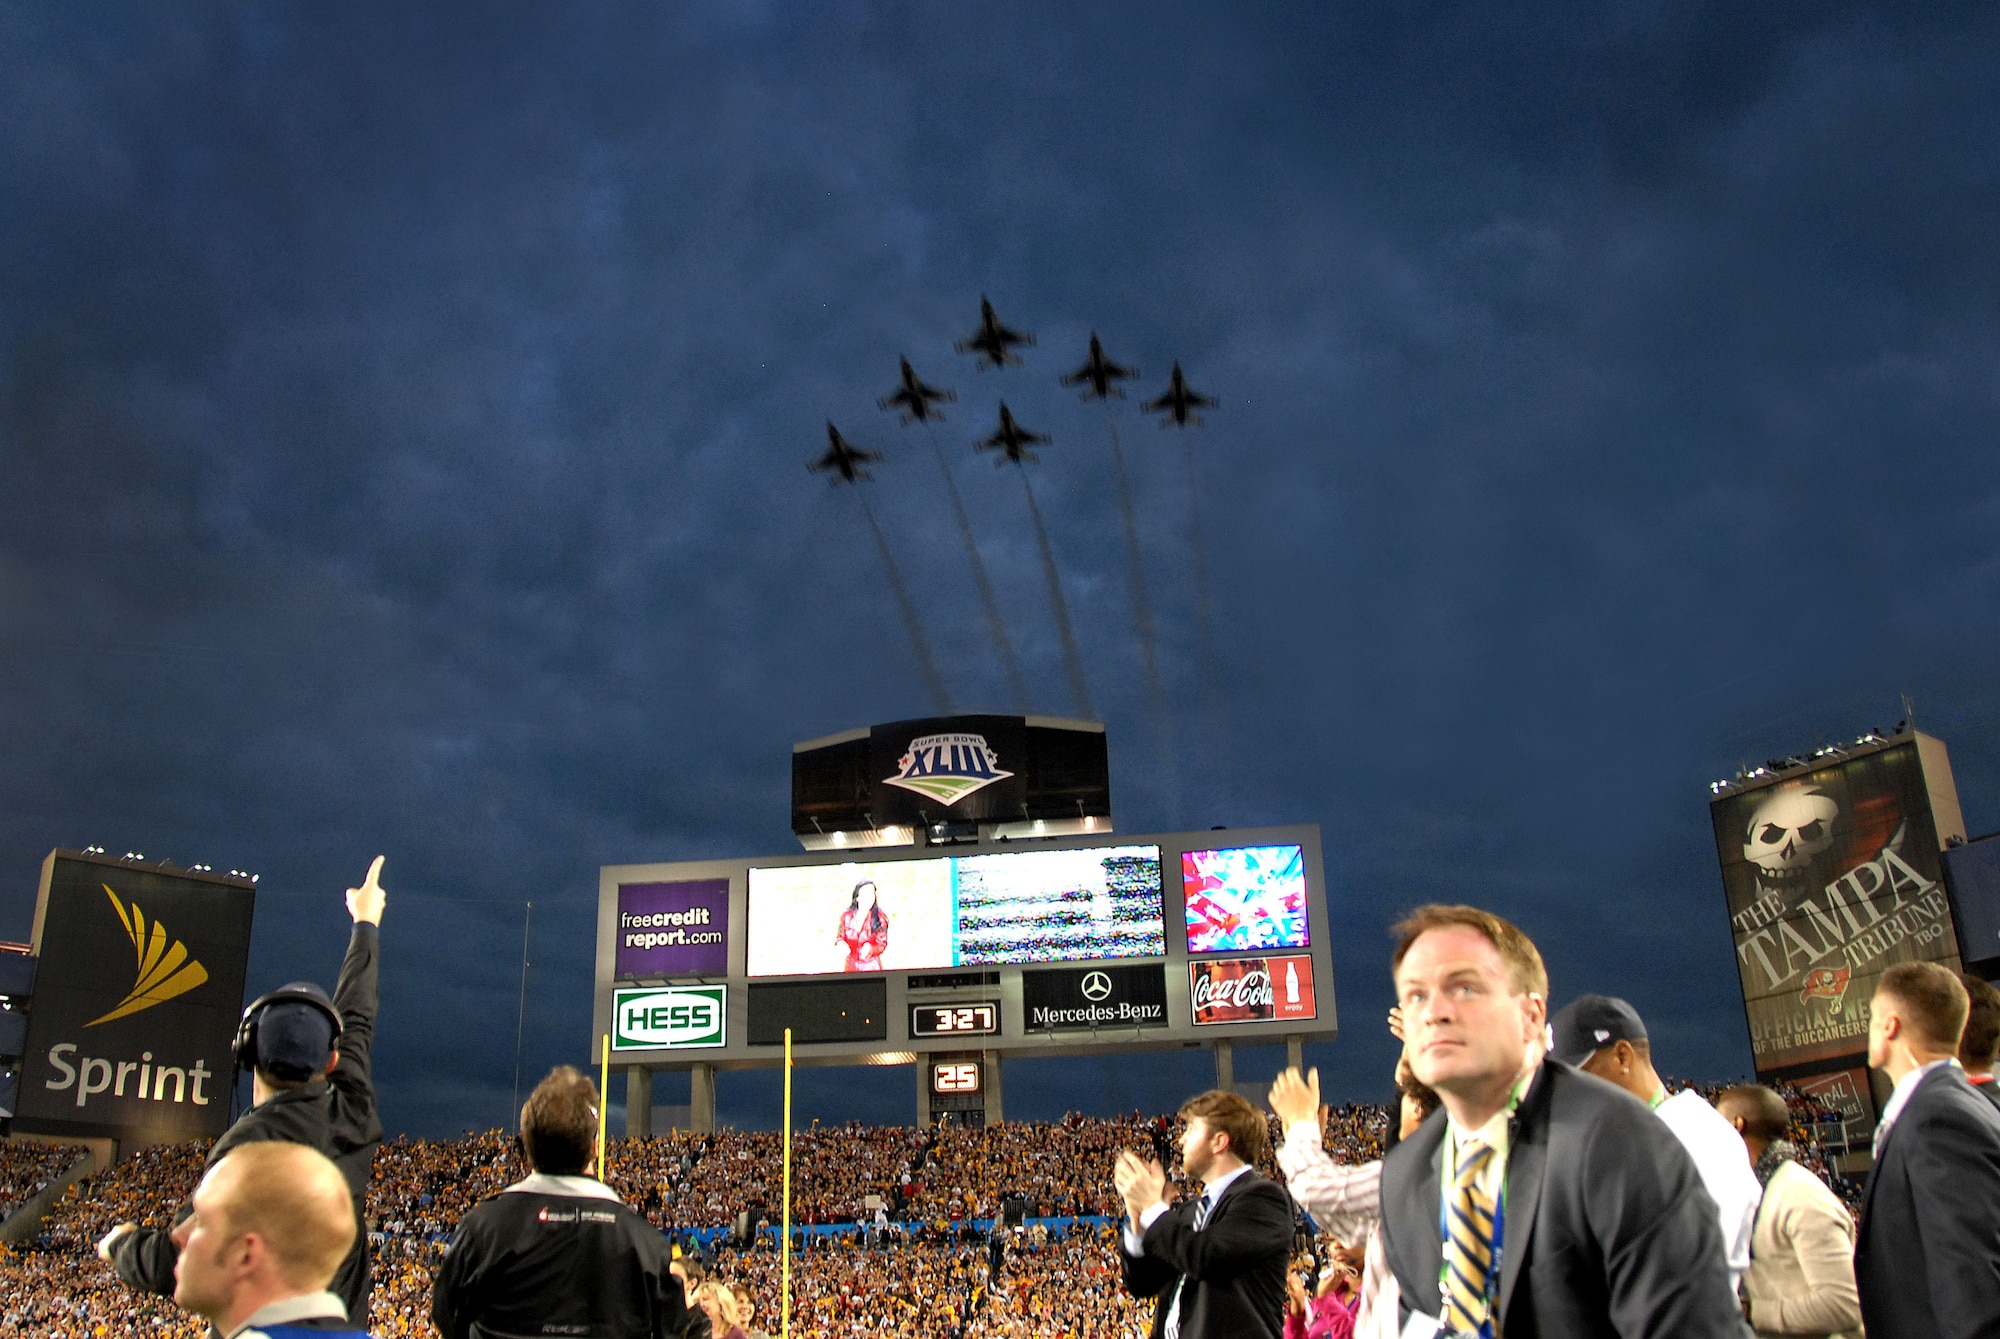 The U.S. Air Force Thunderbirds perform a flyover during the singing of the National Anthem during Super Bowl XLIII Feb. 1, at Raymond James Stadium in Tampa, Fla. (U.S. Air Force photo/Staff Sgt. Bradley Lail) 